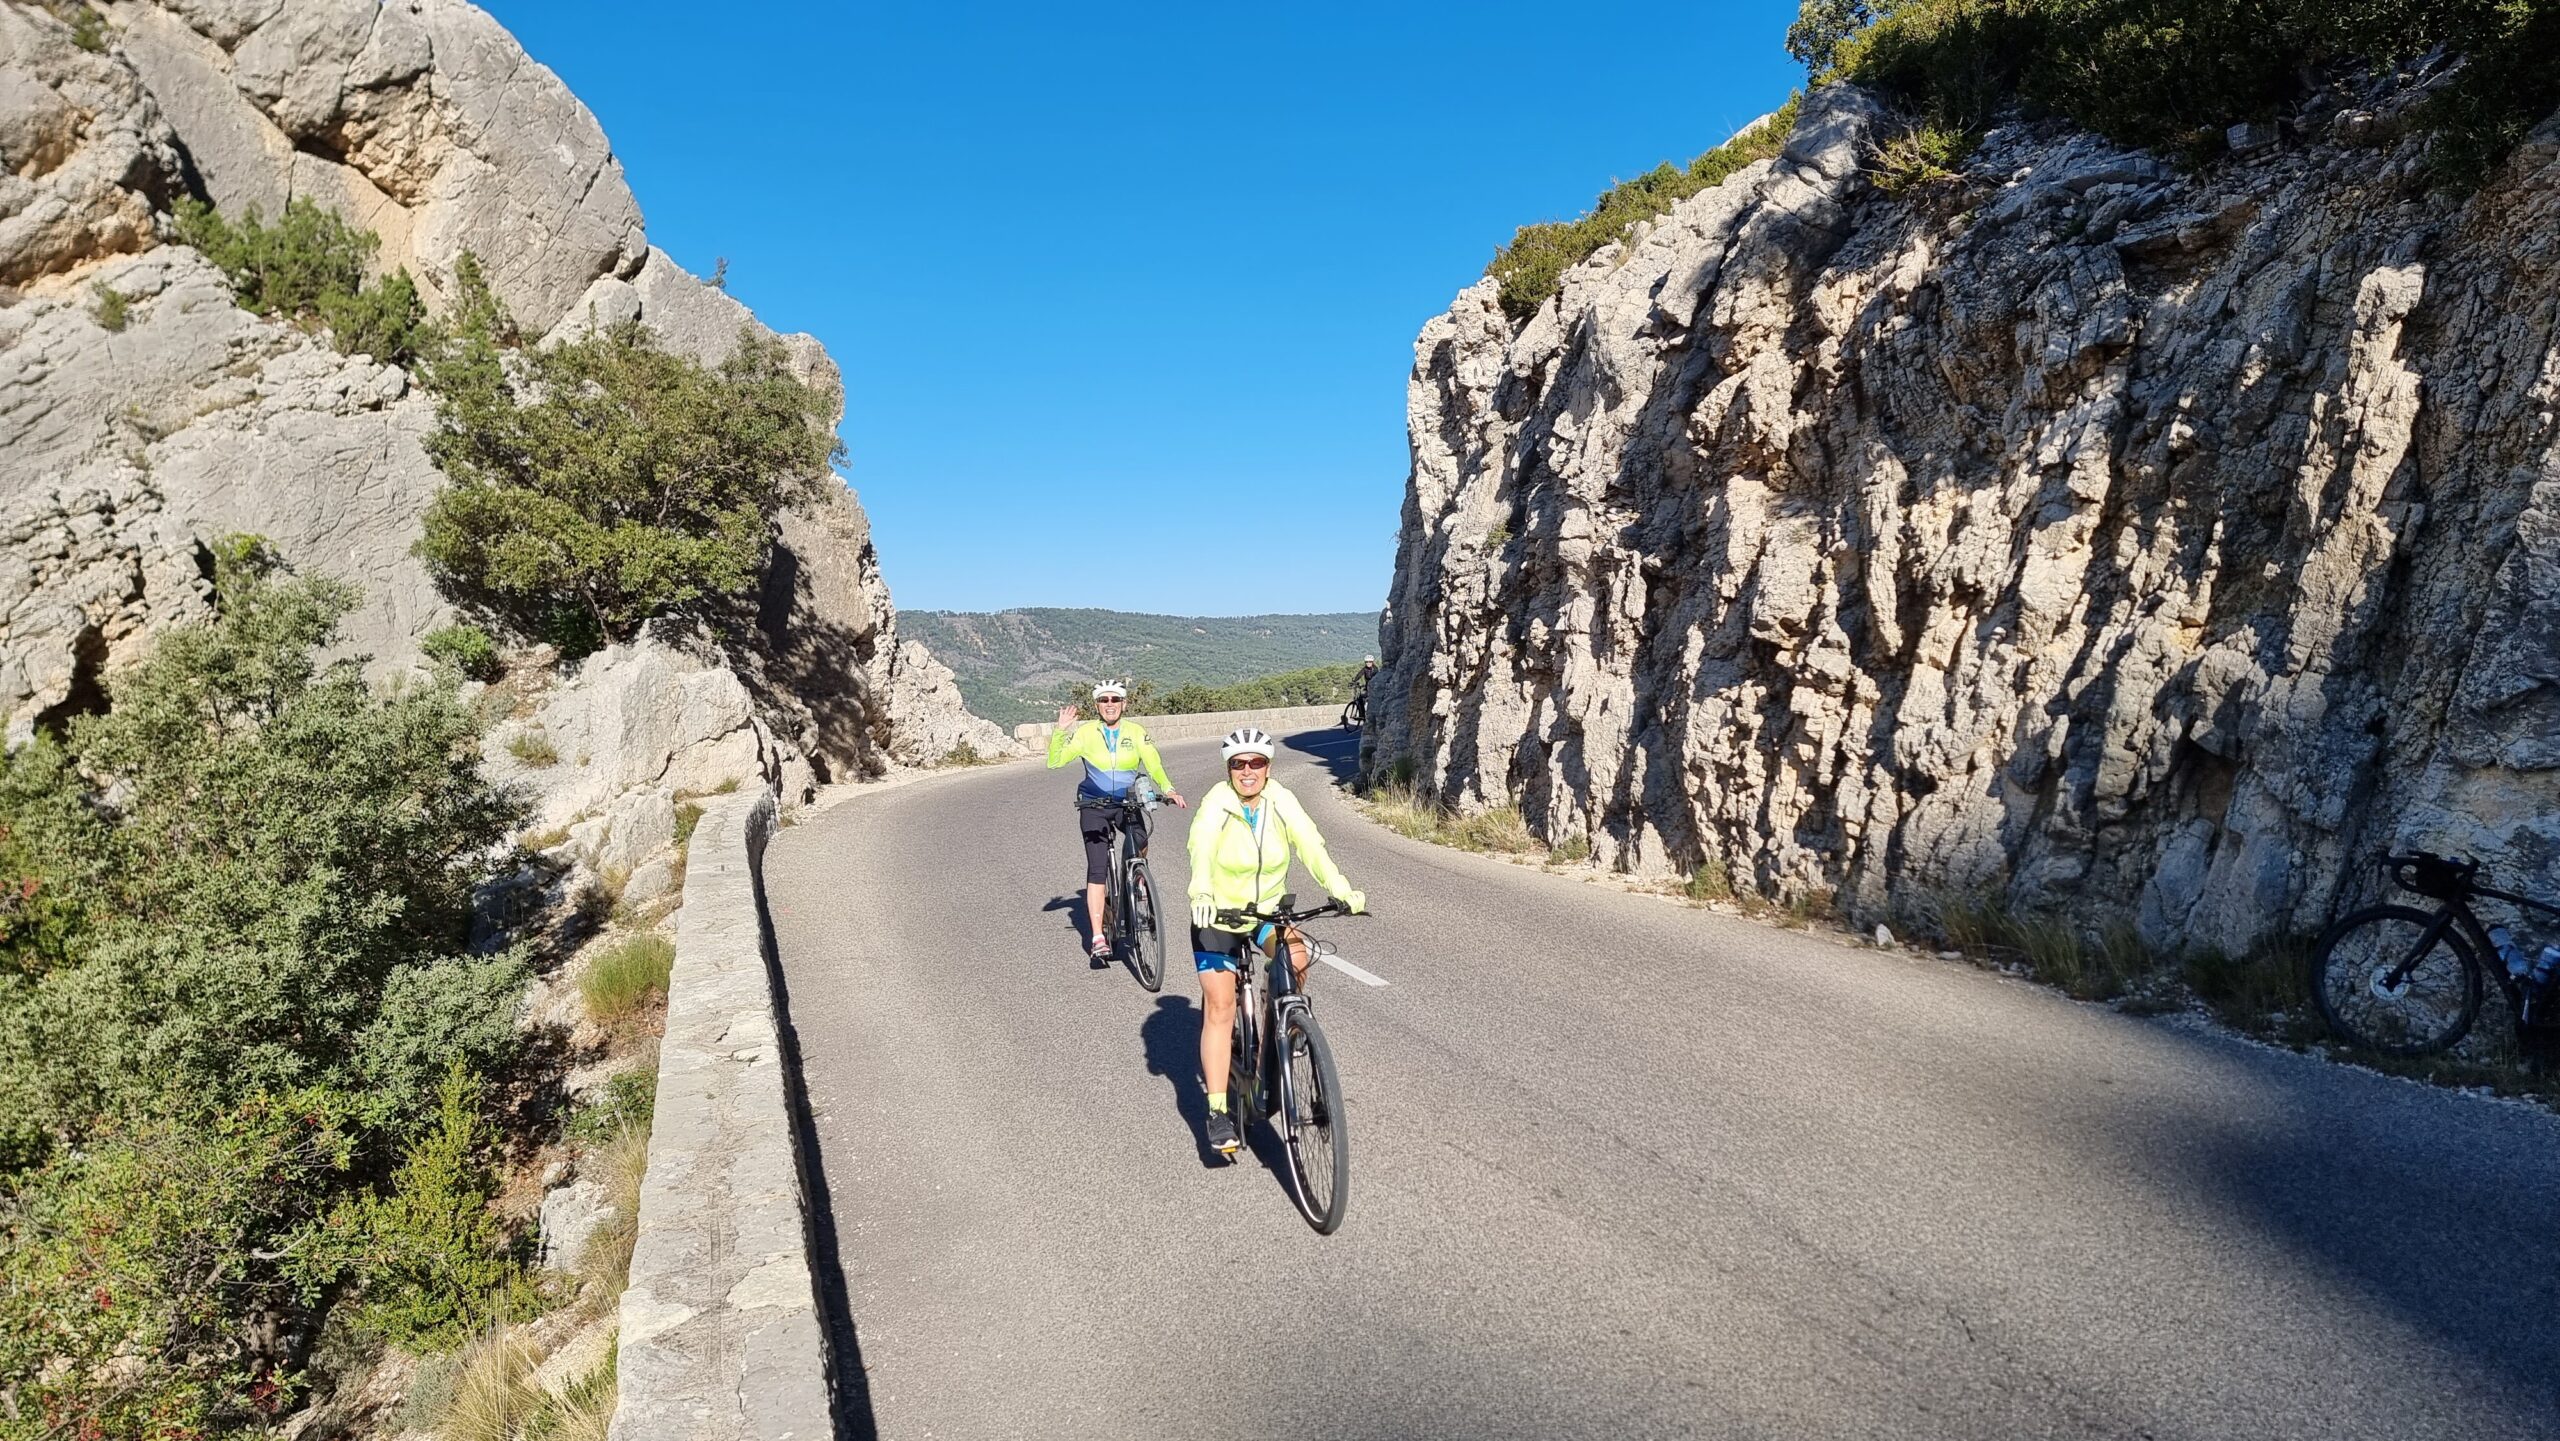 A couple of cyclists waving at the camera in Gorges du Verdon